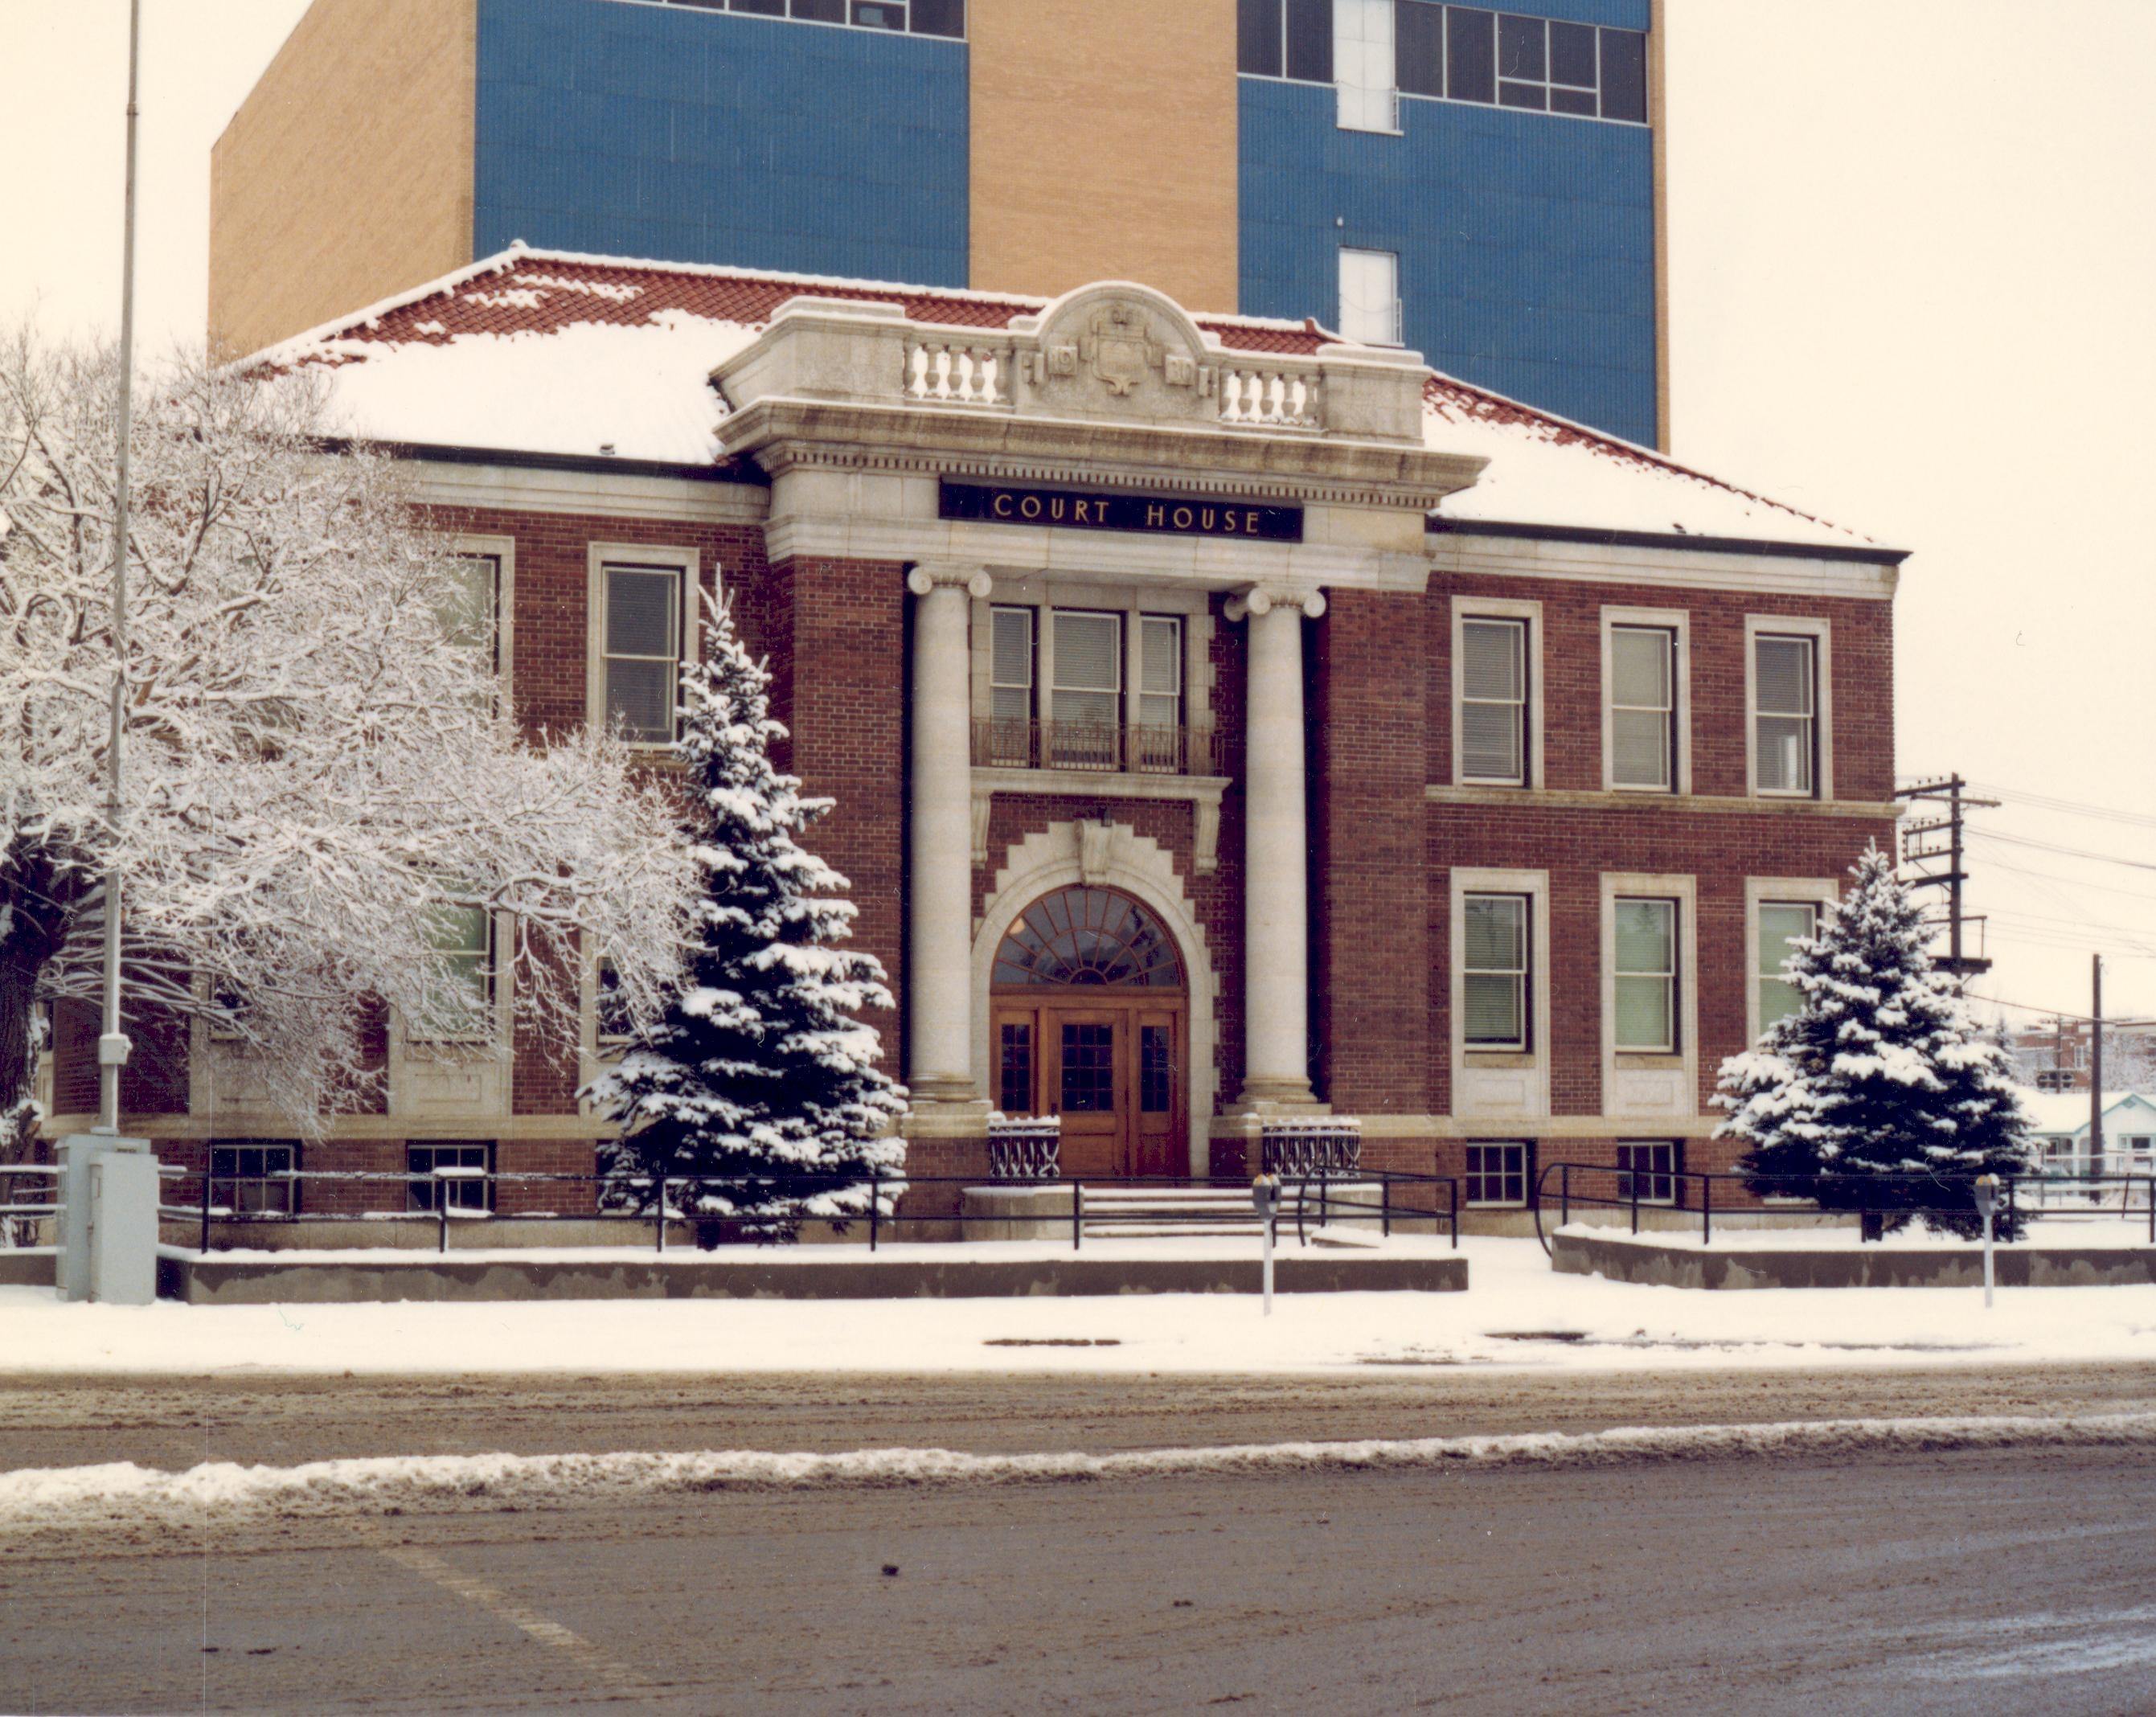 HEART OF DOWNTOWN- The Old Red Deer Court House on Ross St. c. 1986.